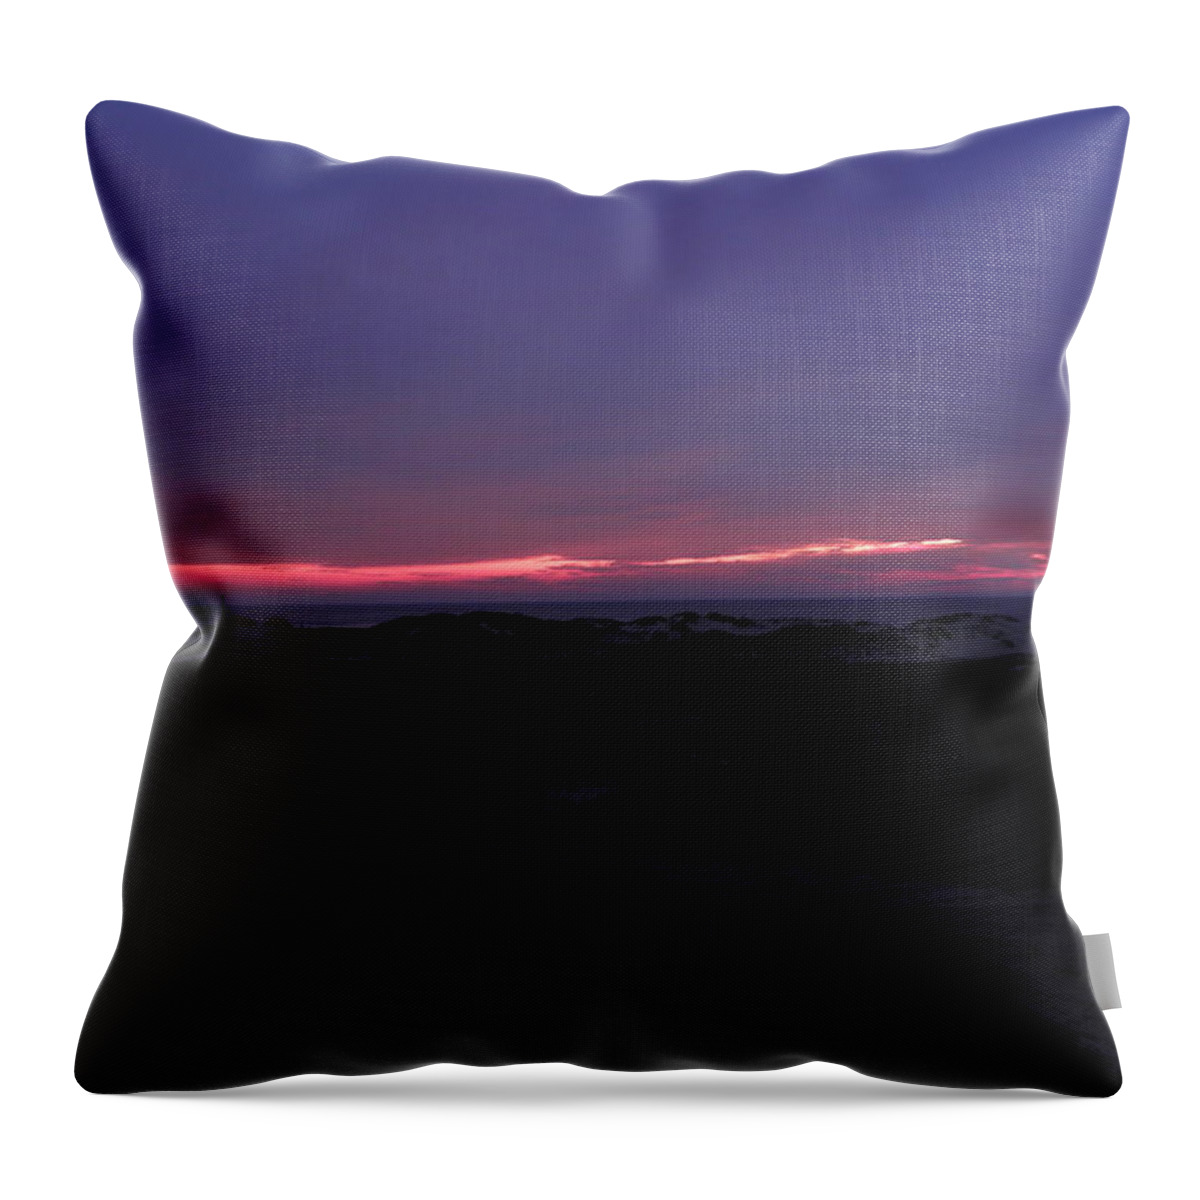 Sunrise Throw Pillow featuring the photograph Pink Sunrise Over The Dunes by Kim Galluzzo Wozniak